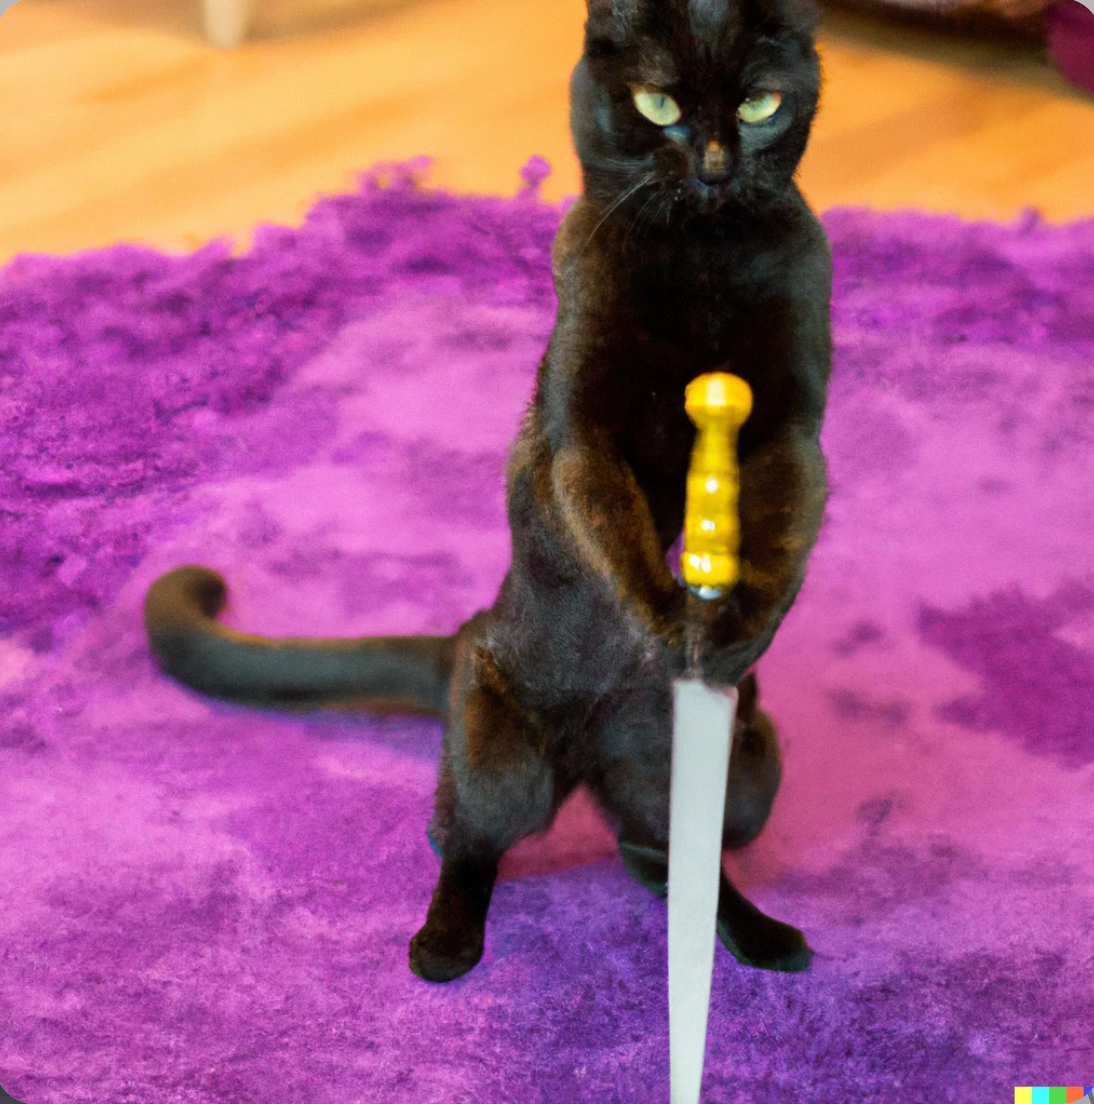 Cat with a sword